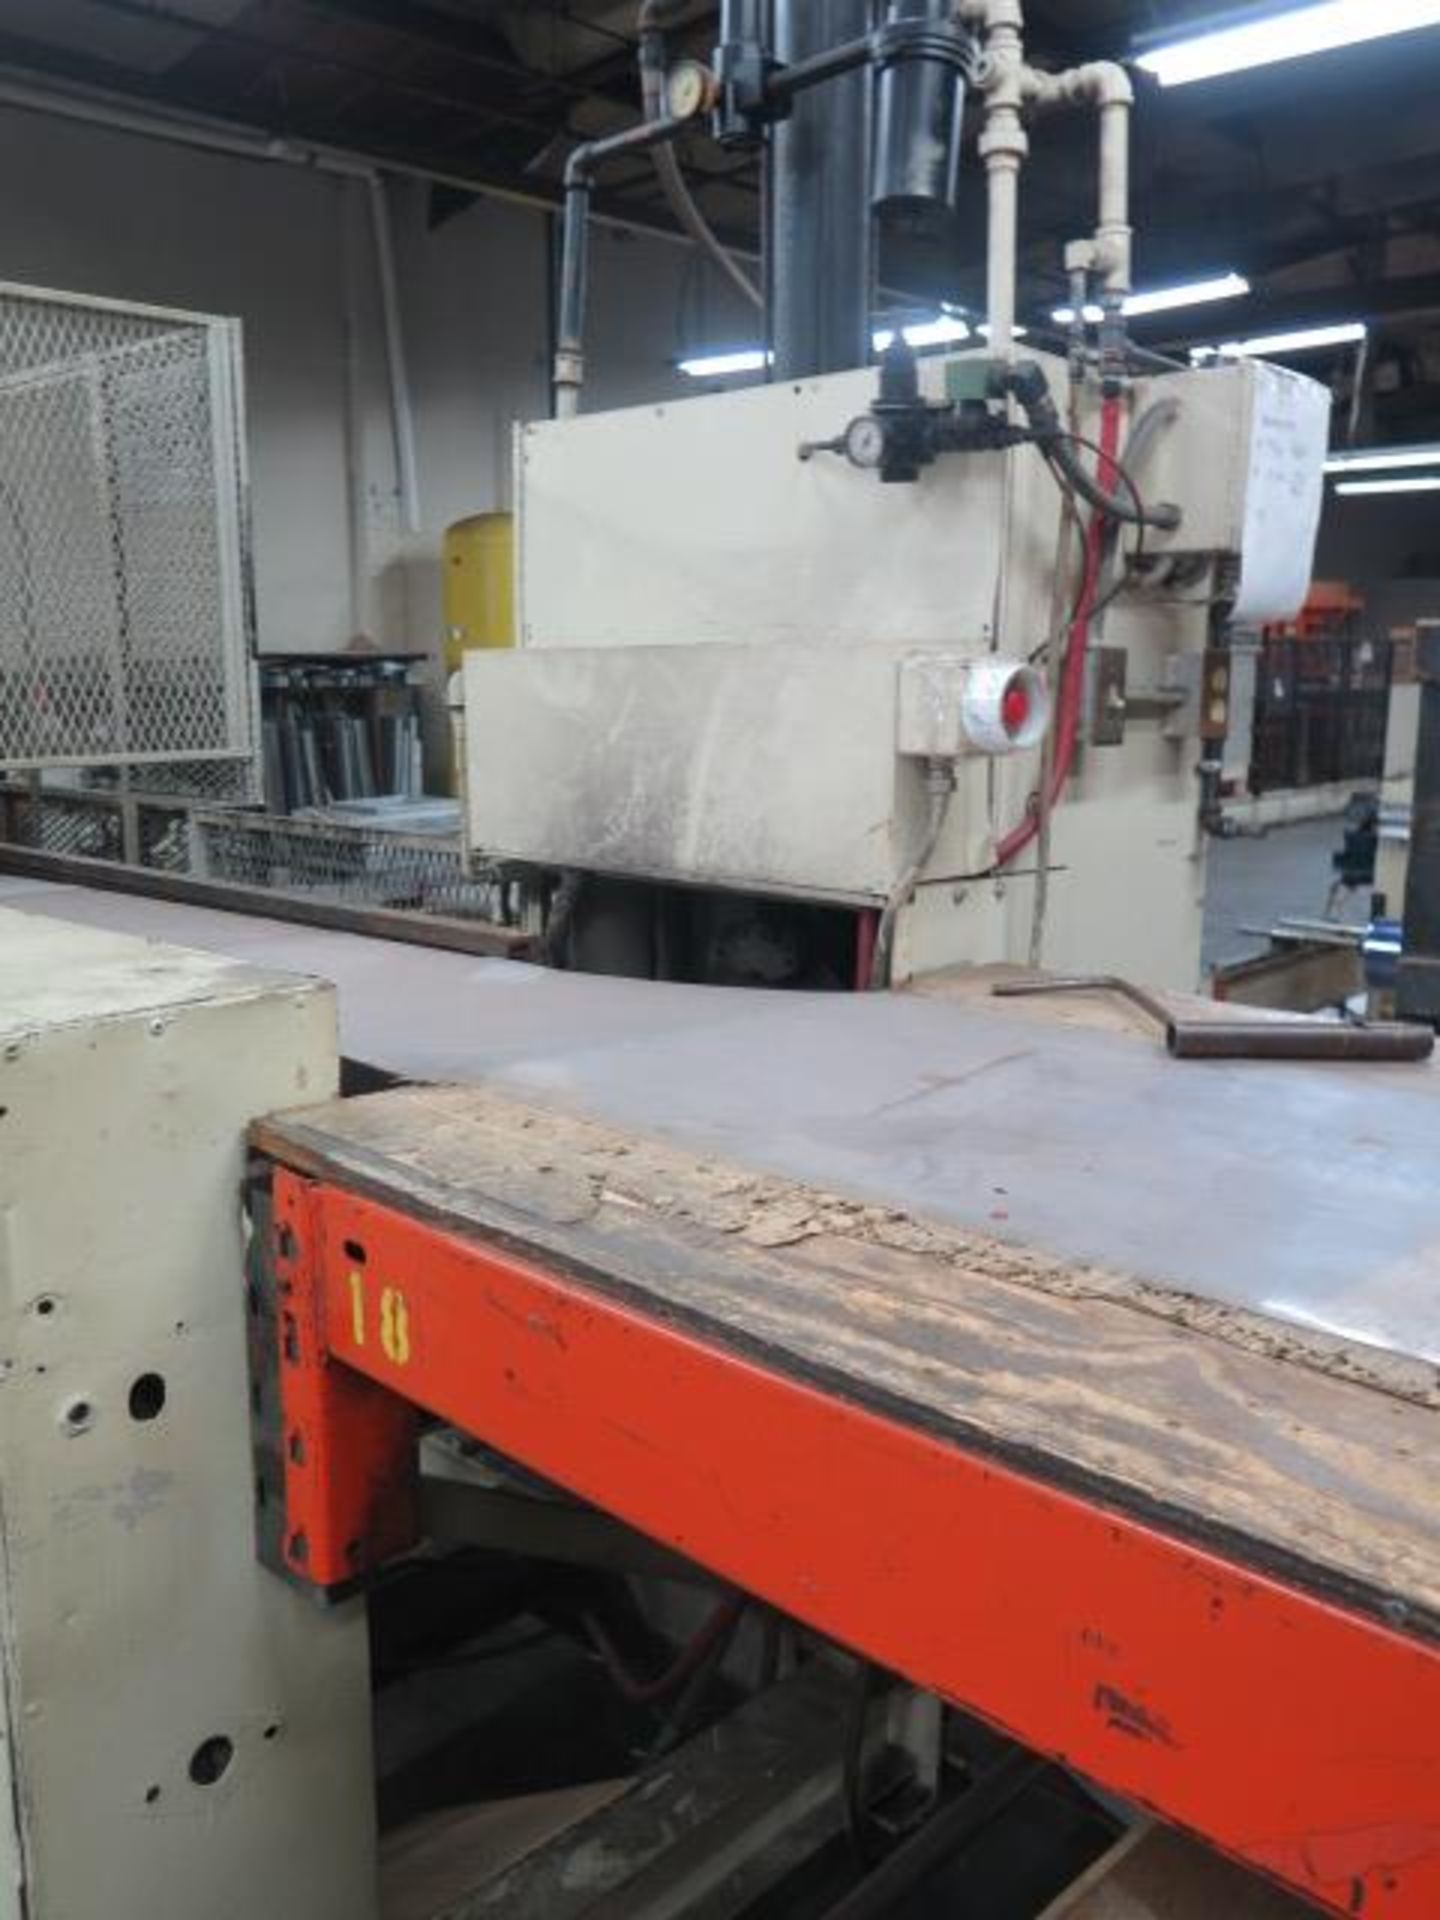 Sencorp Systems Thermoforming w/ Sencorp Controls, Film Preheater, 10” x 30” Vacuum, SOLD AS IS - Image 26 of 30